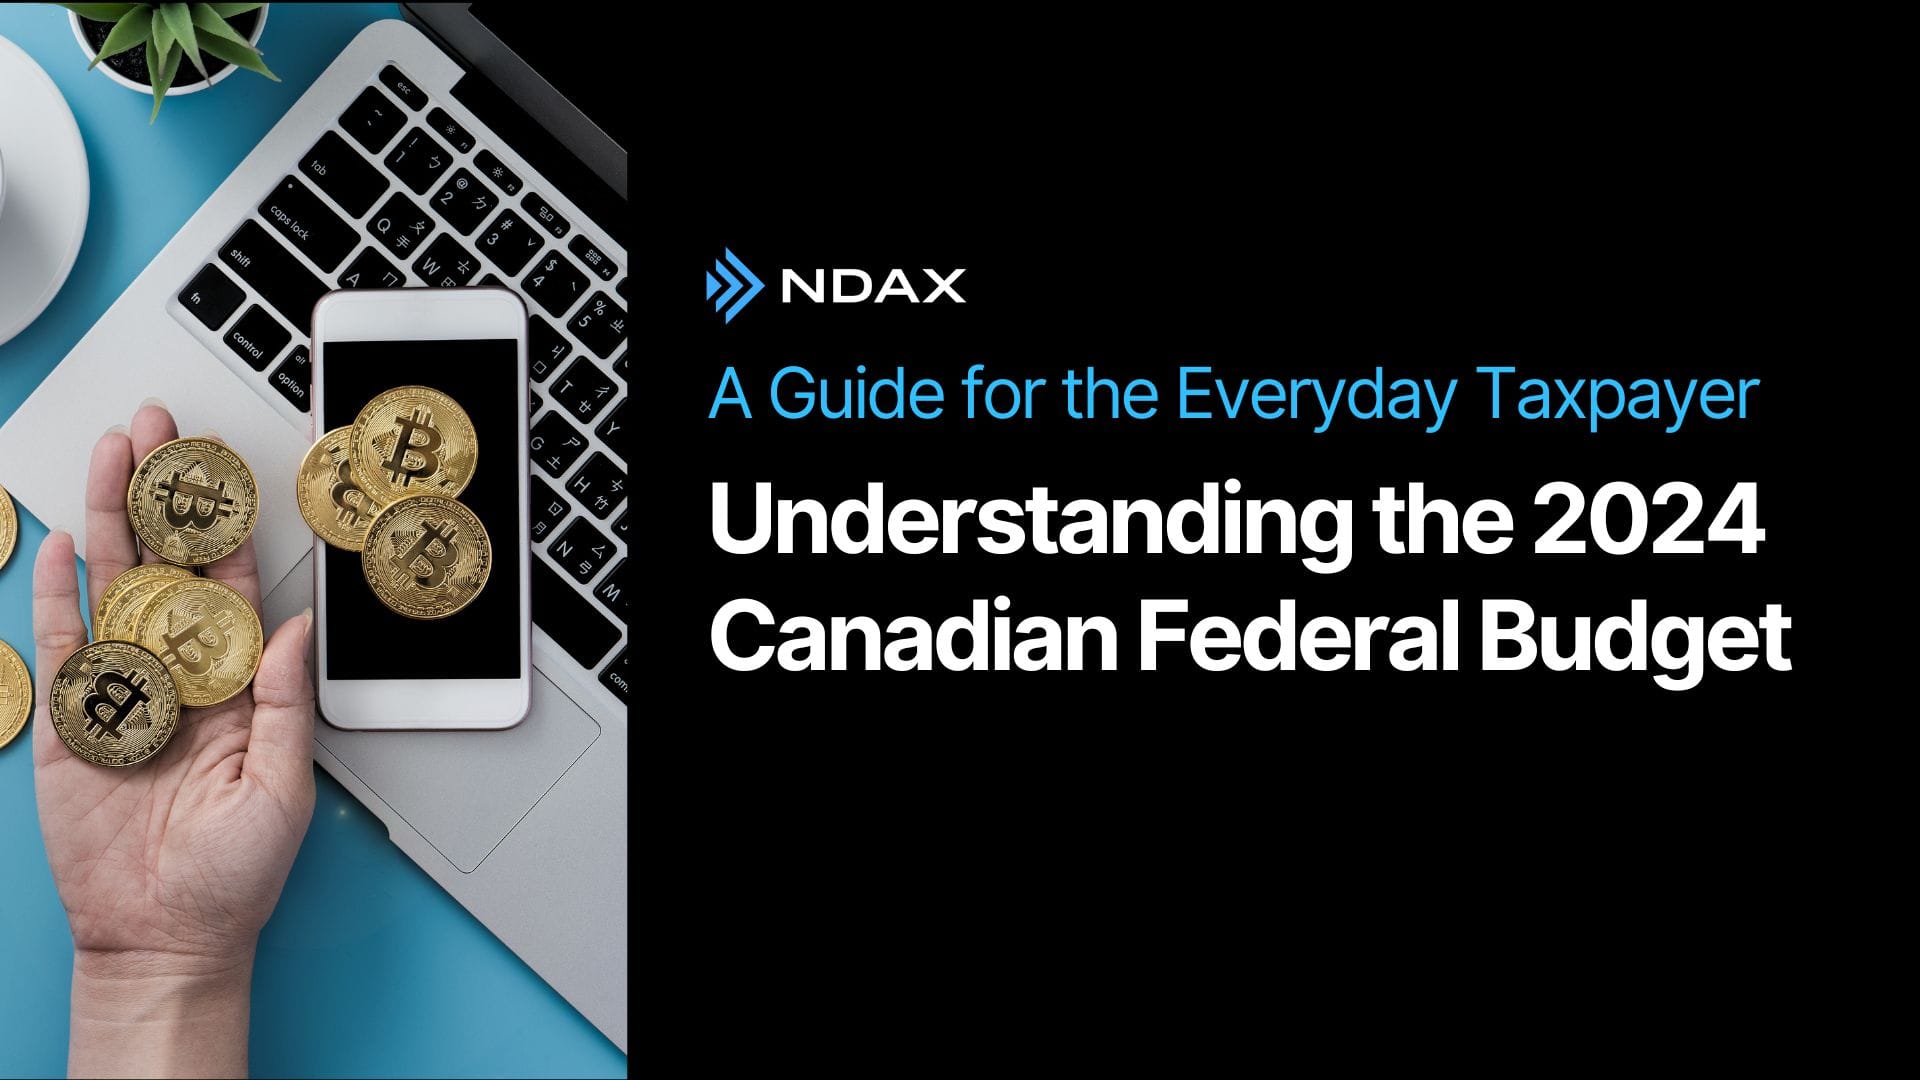 Understanding the 2024 Canadian Federal Budget: A Guide for the Everyday Taxpayer